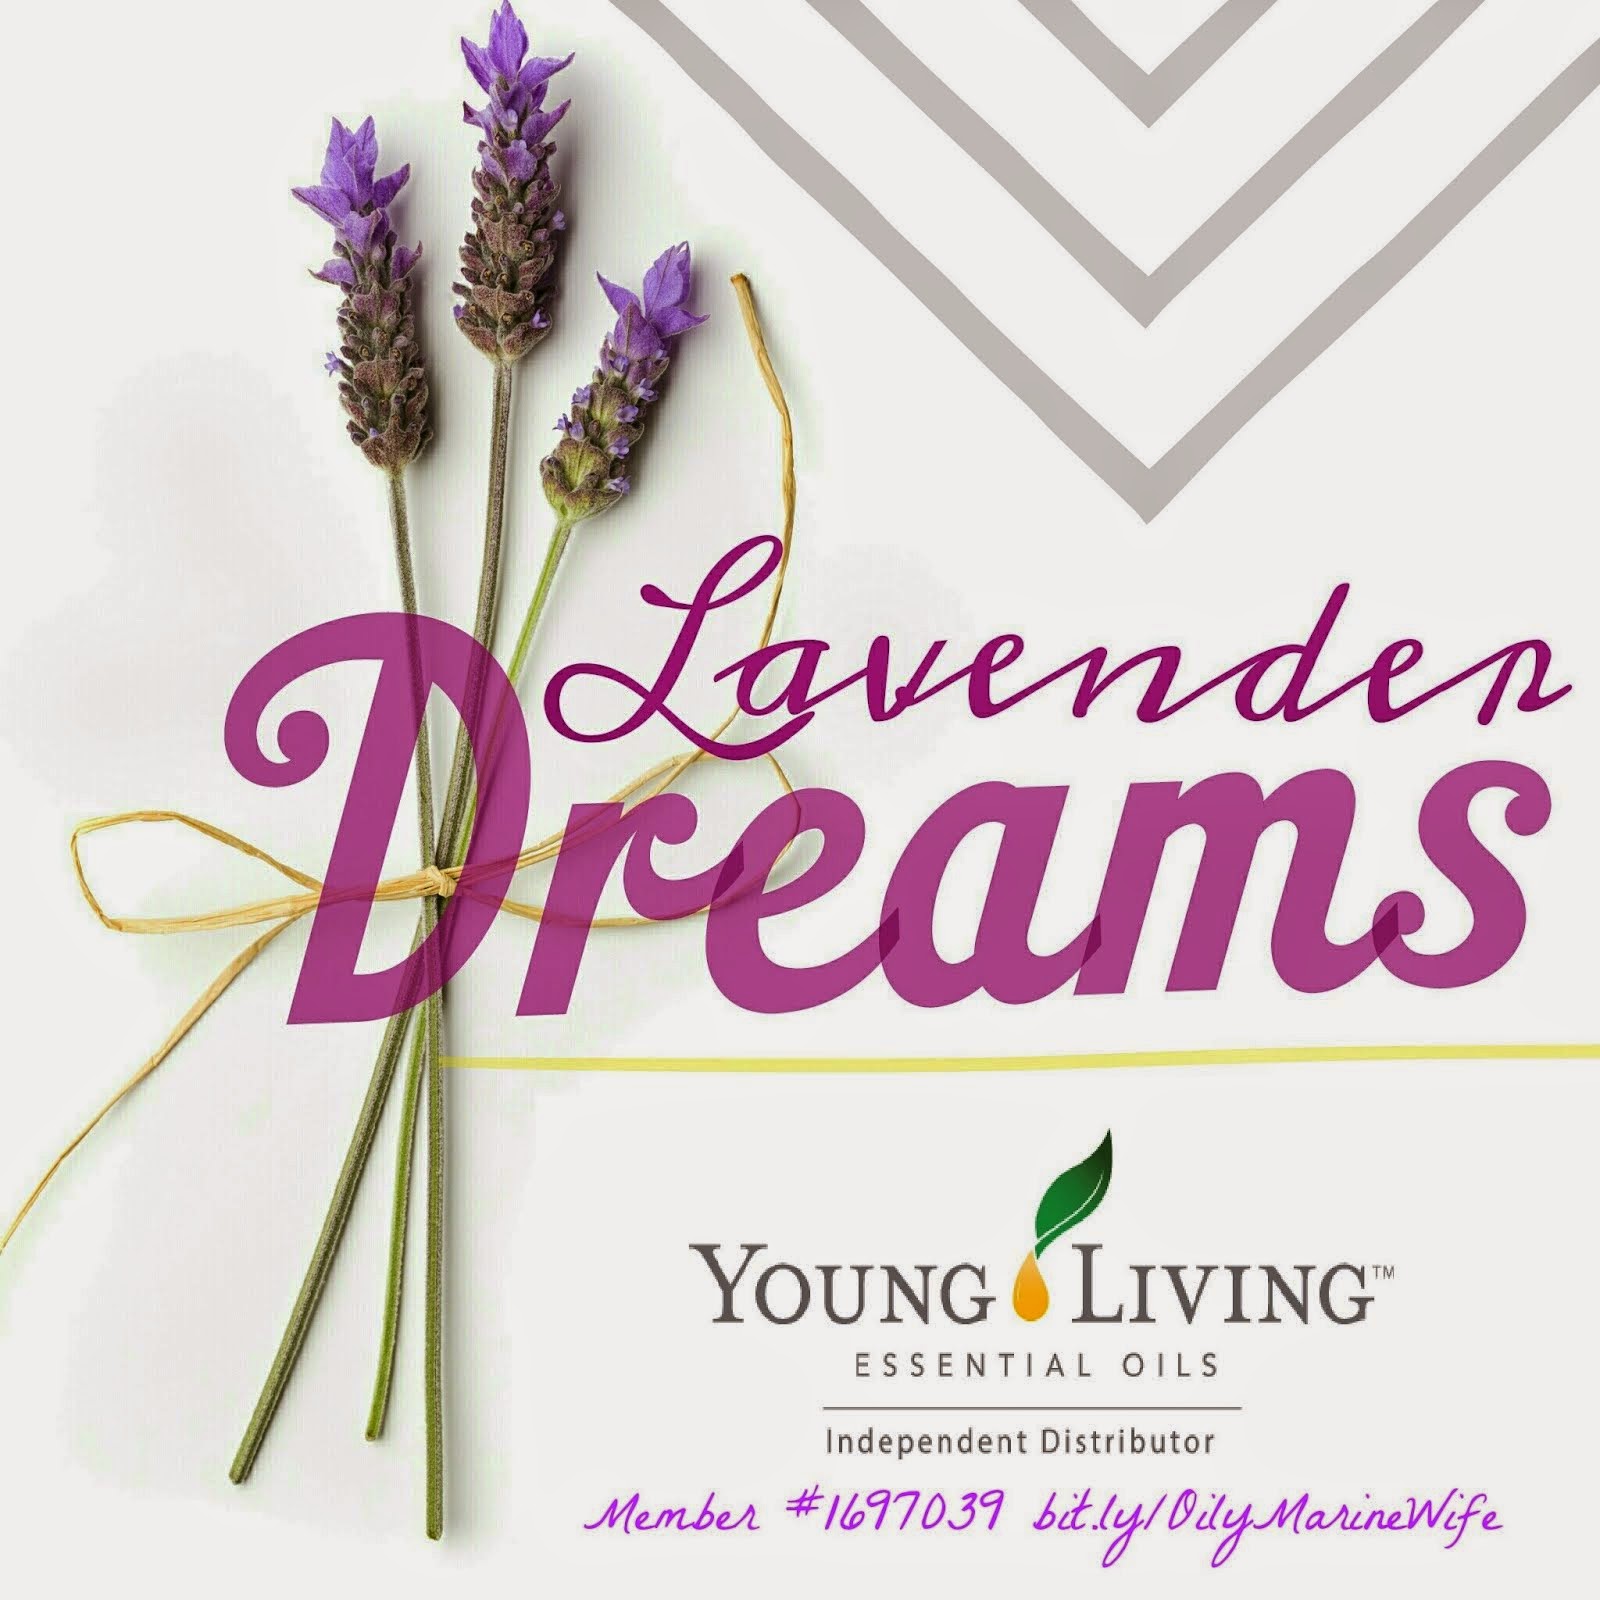 Loving my Young Living Essential Oils